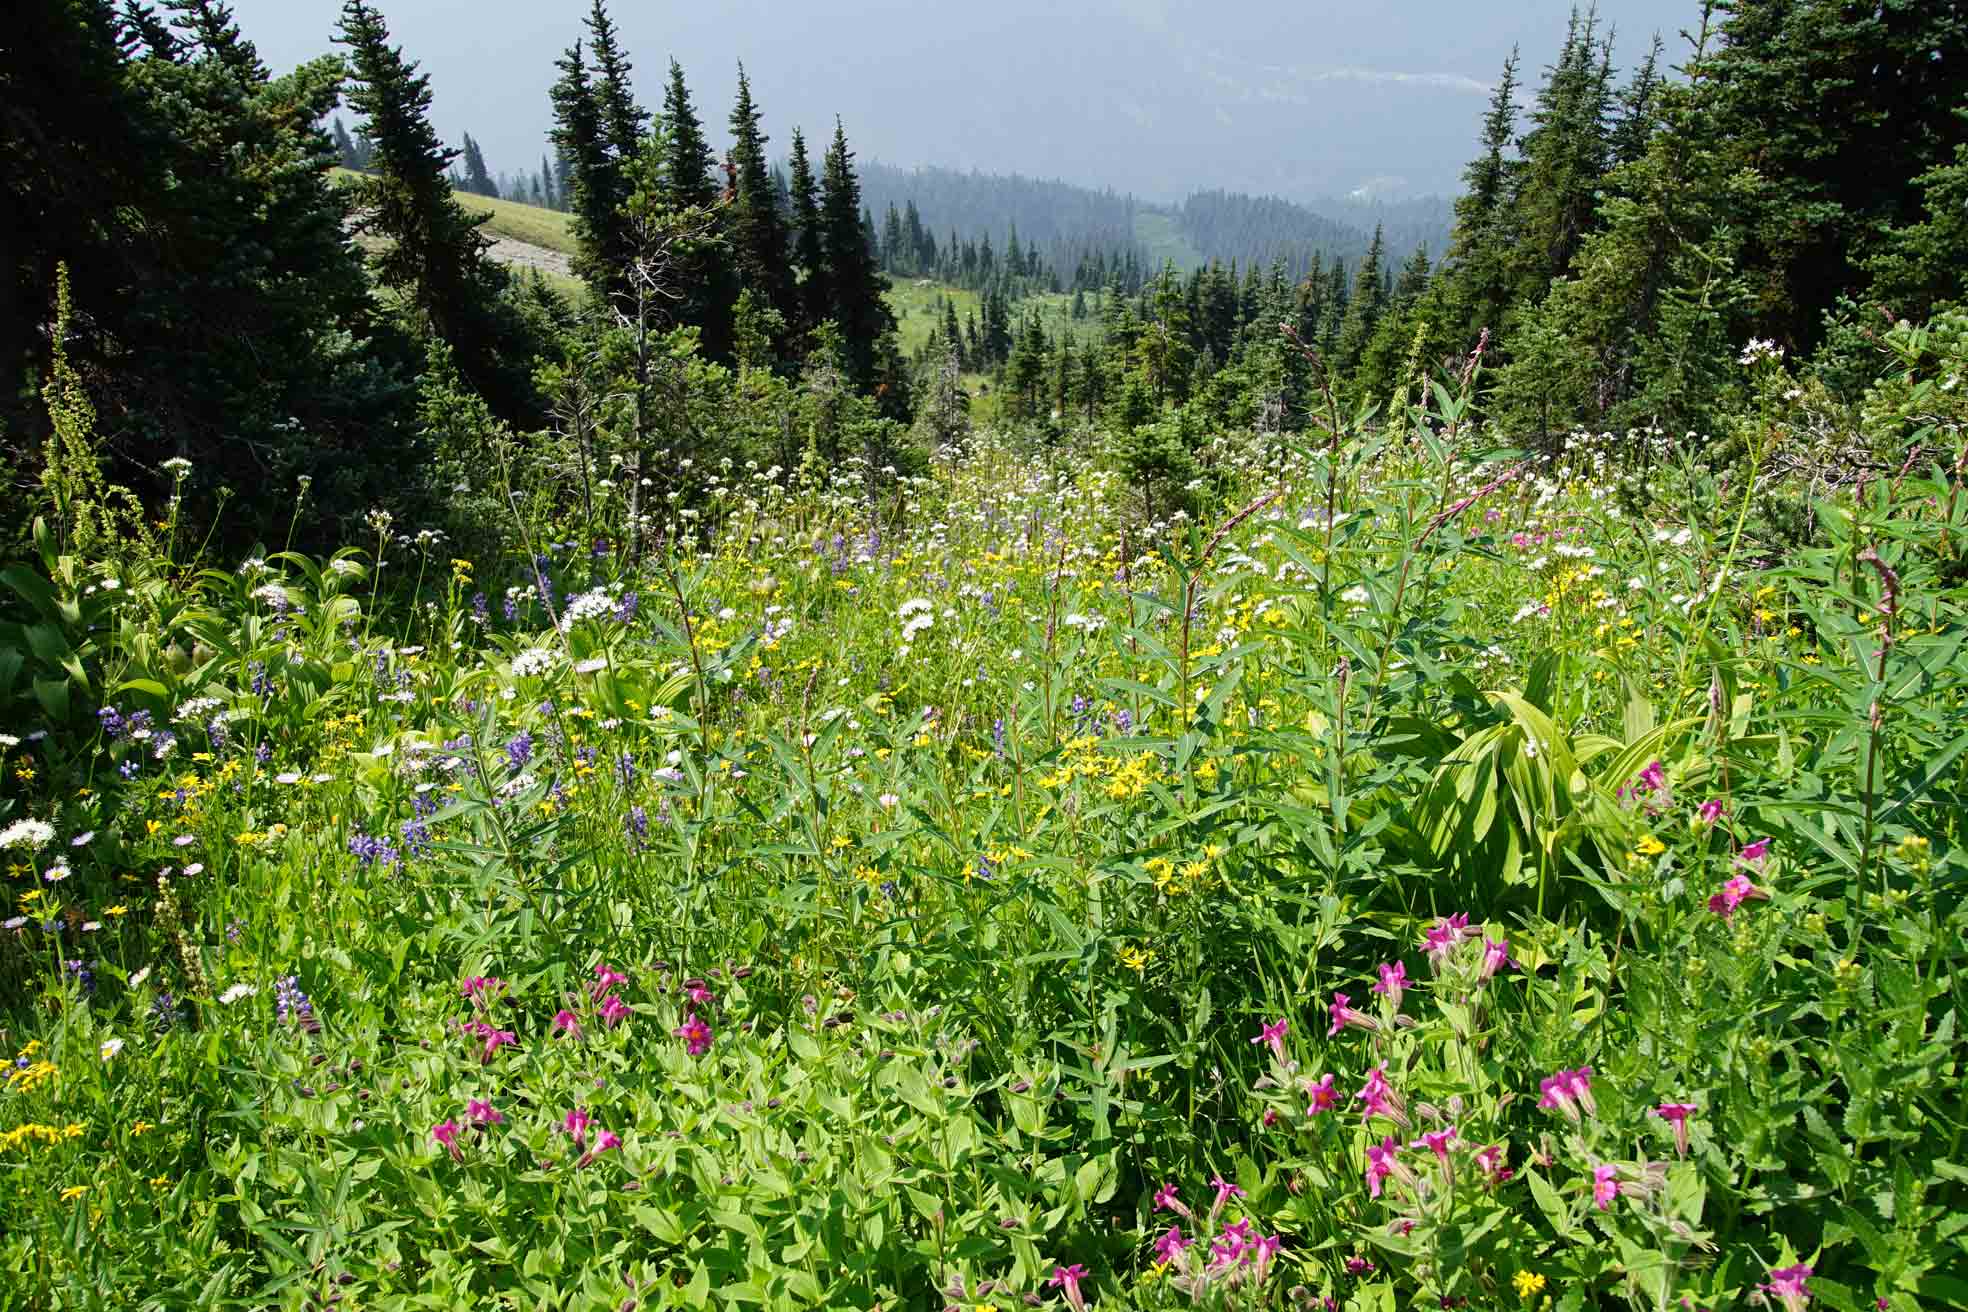 Whistler Alpine hiking flowers and forest